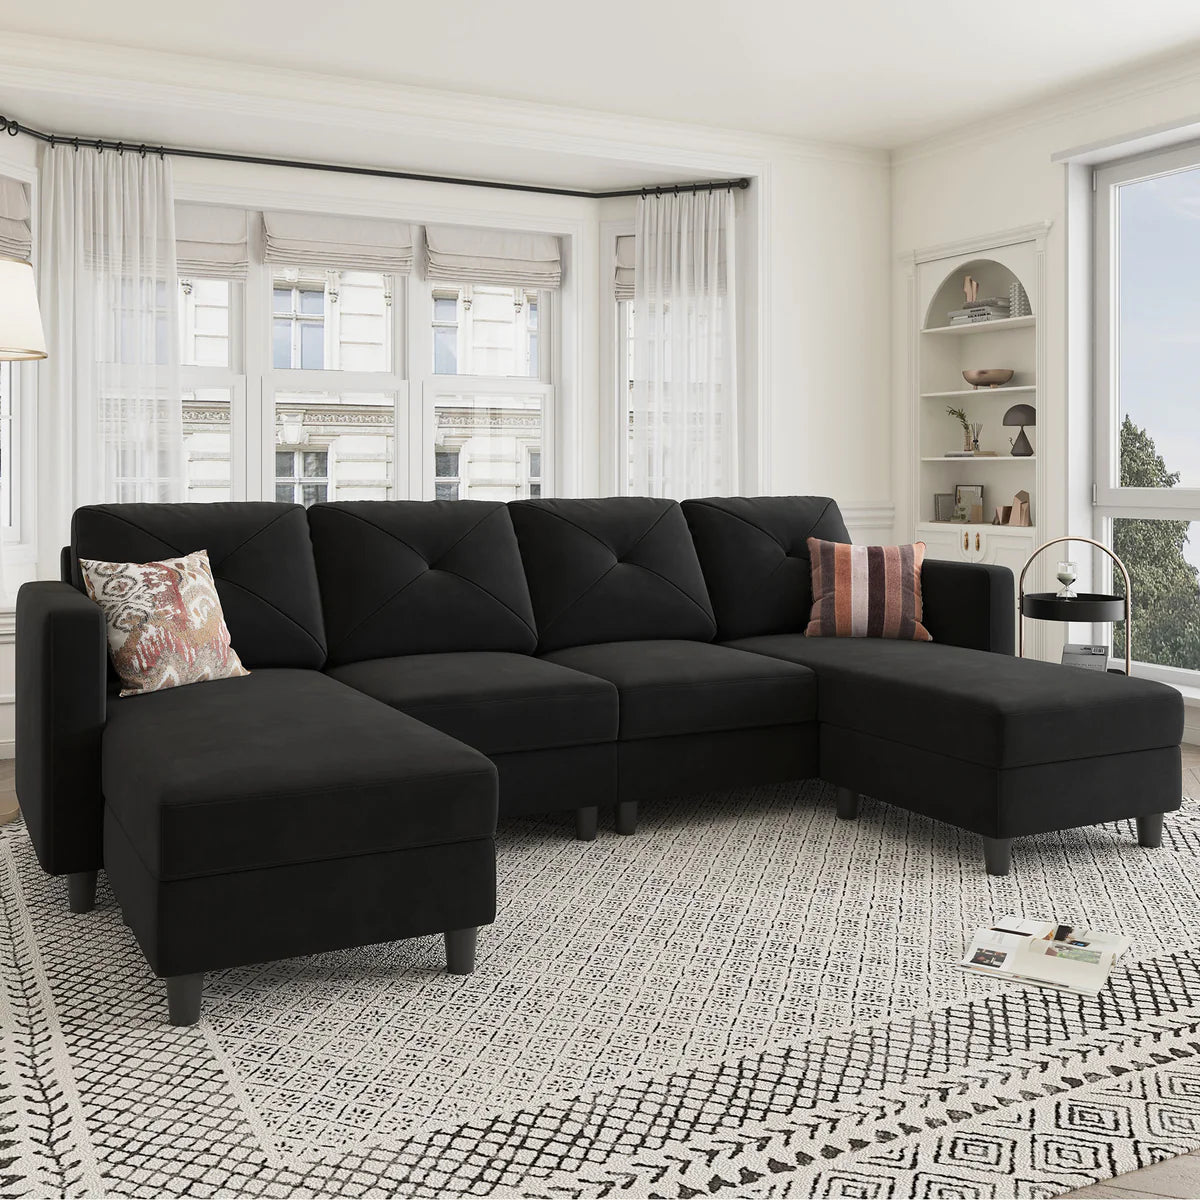 a convertible sectional sofa in black color